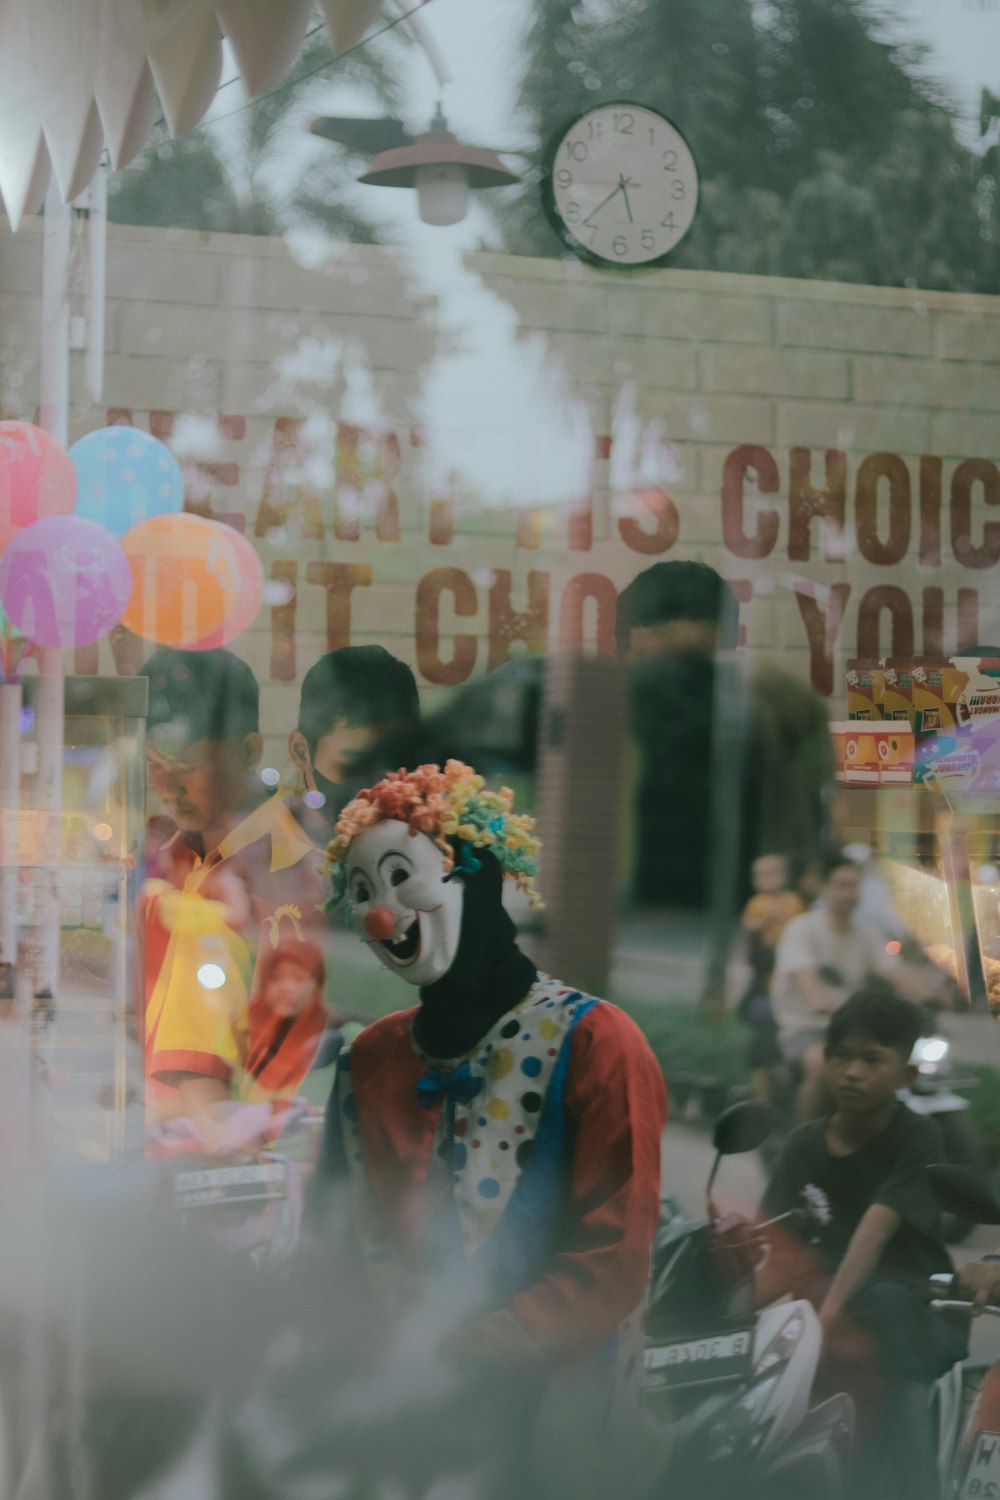 a clown with a clown mask on standing in front of a store window